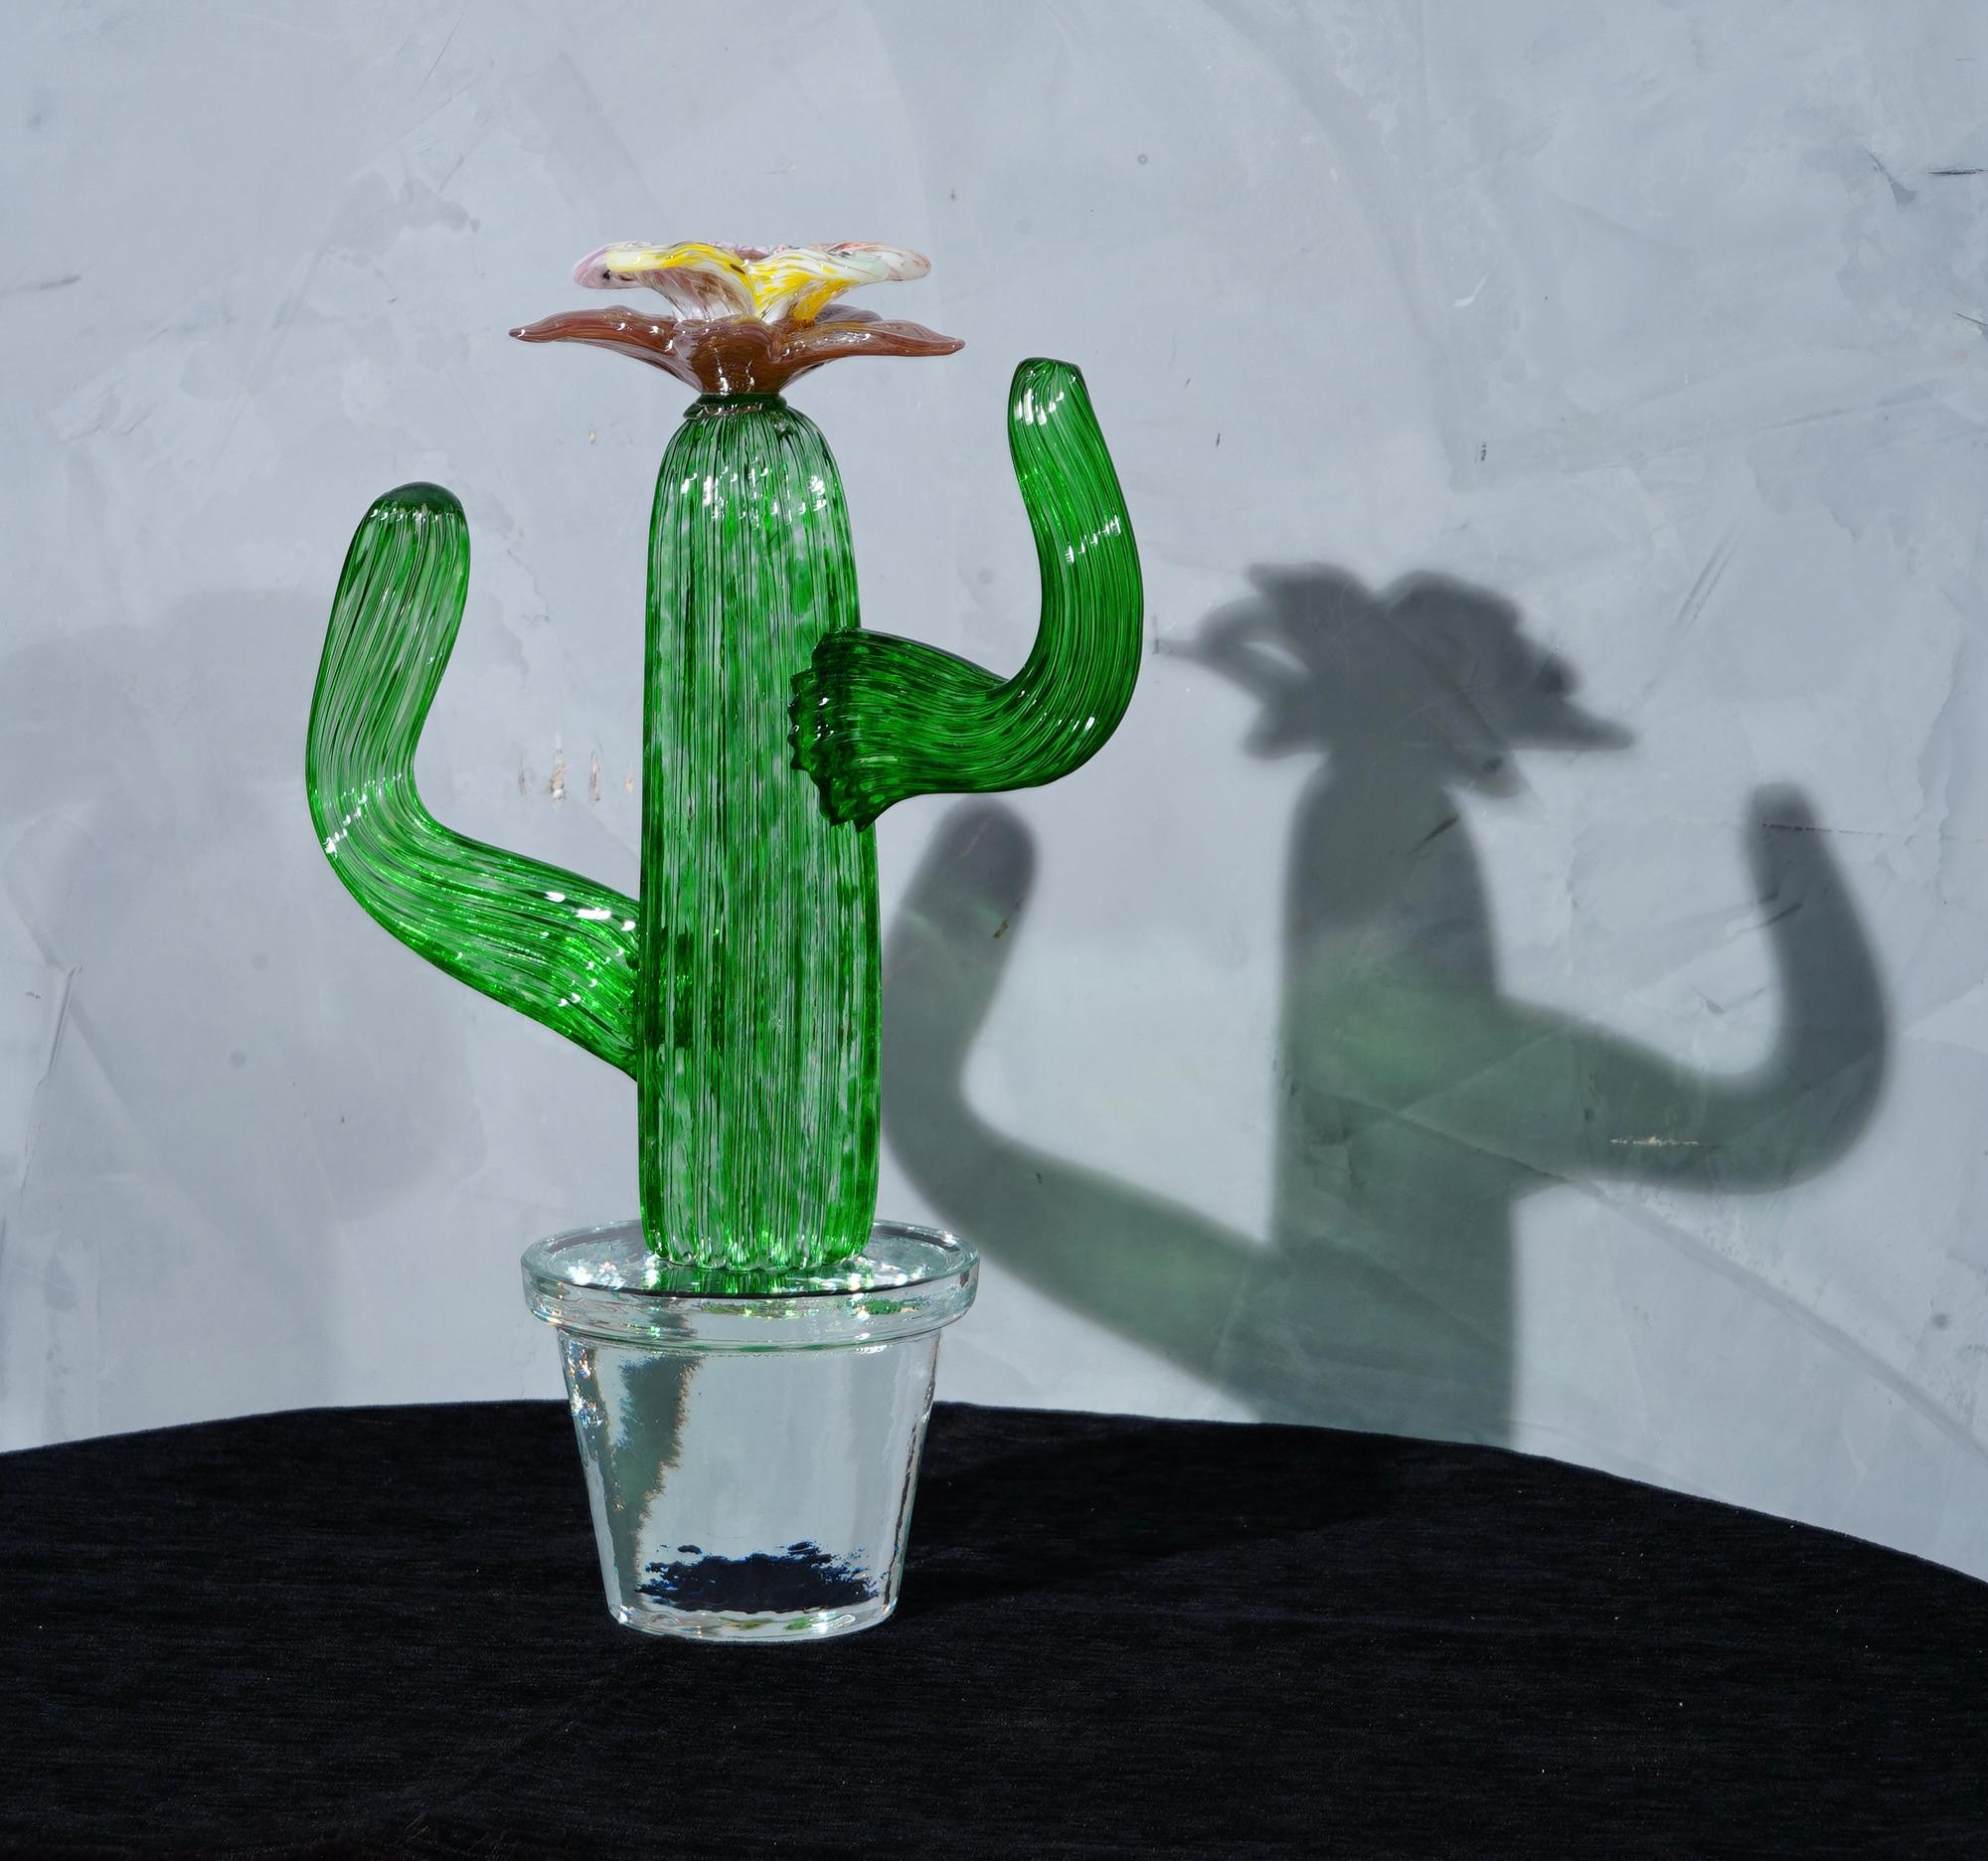 Italian design by Marta Marzotto creator of style, this cactus is a fashion icon of the Italian style, emerald green with a red and yellow colored spot, the flower.

In limited edition, as can be seen from the writing under the transparent vase